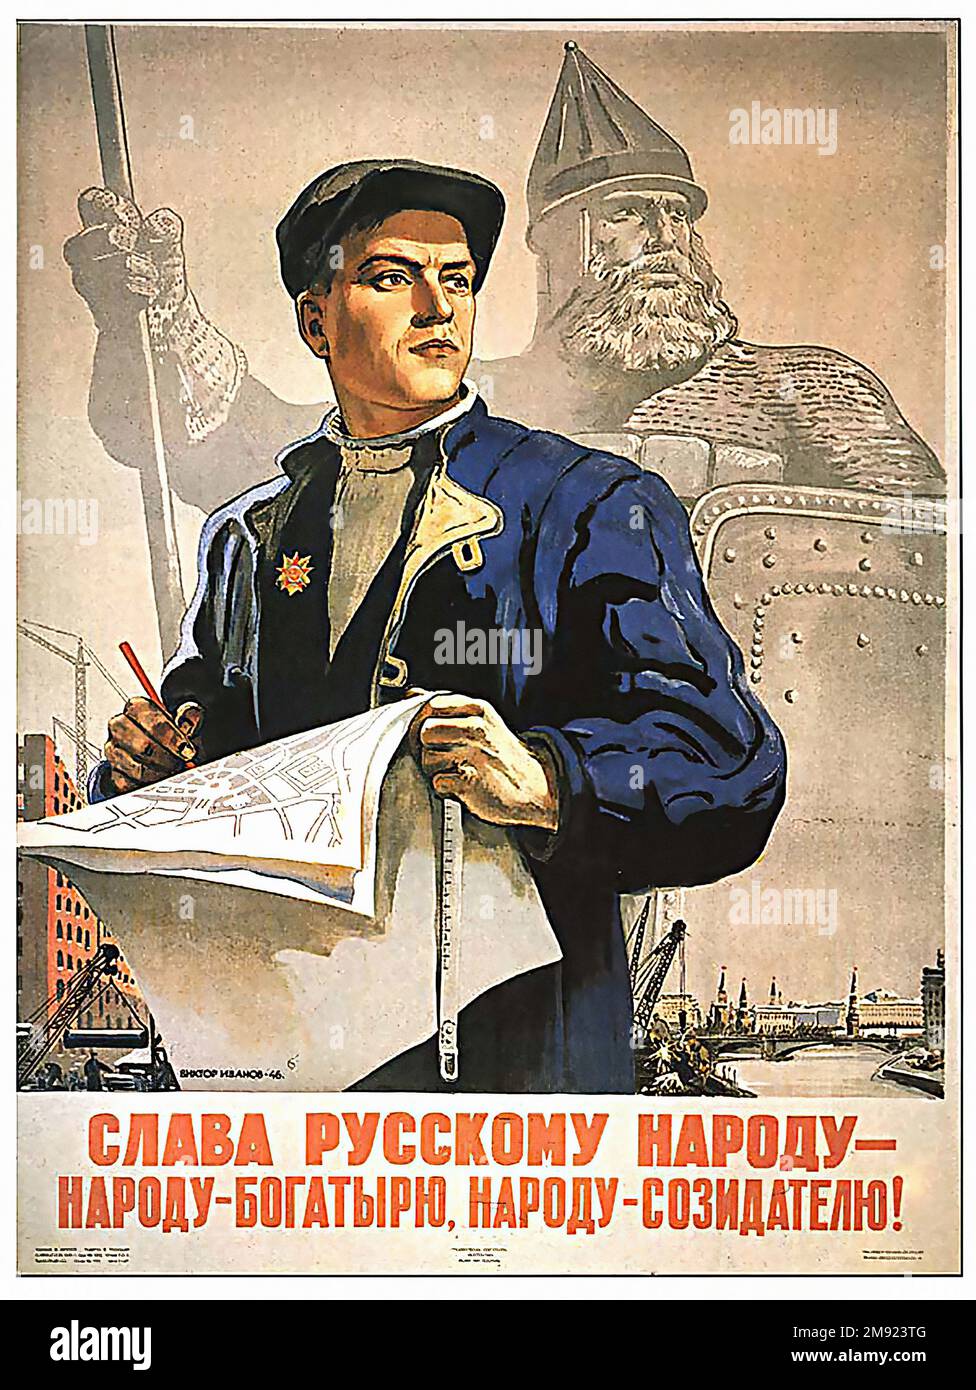 Glory To The Russian Nation, To The People's Hero, The People's Creator!  (Translated from Russian) - Vintage USSR soviet propaganda poster Stock Photo